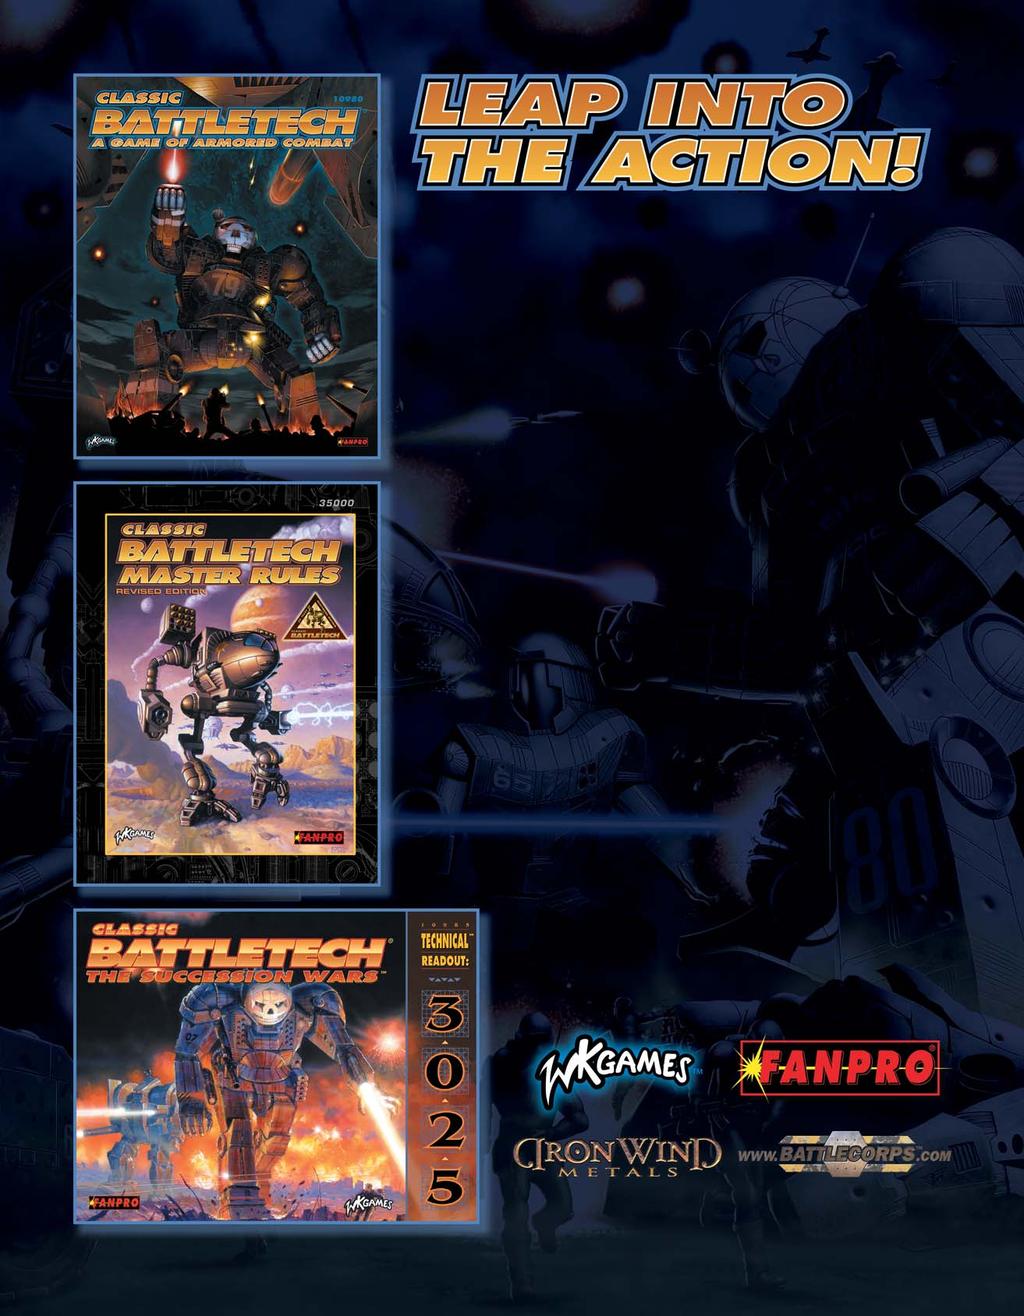 CLASSIC BATTLETECH: A GAME OF ARMORED COMBAT The introductory game in the Classic BattleTech line, the Classic BattleTech box set hurtles you onto the battlefields of the thirty-first century.